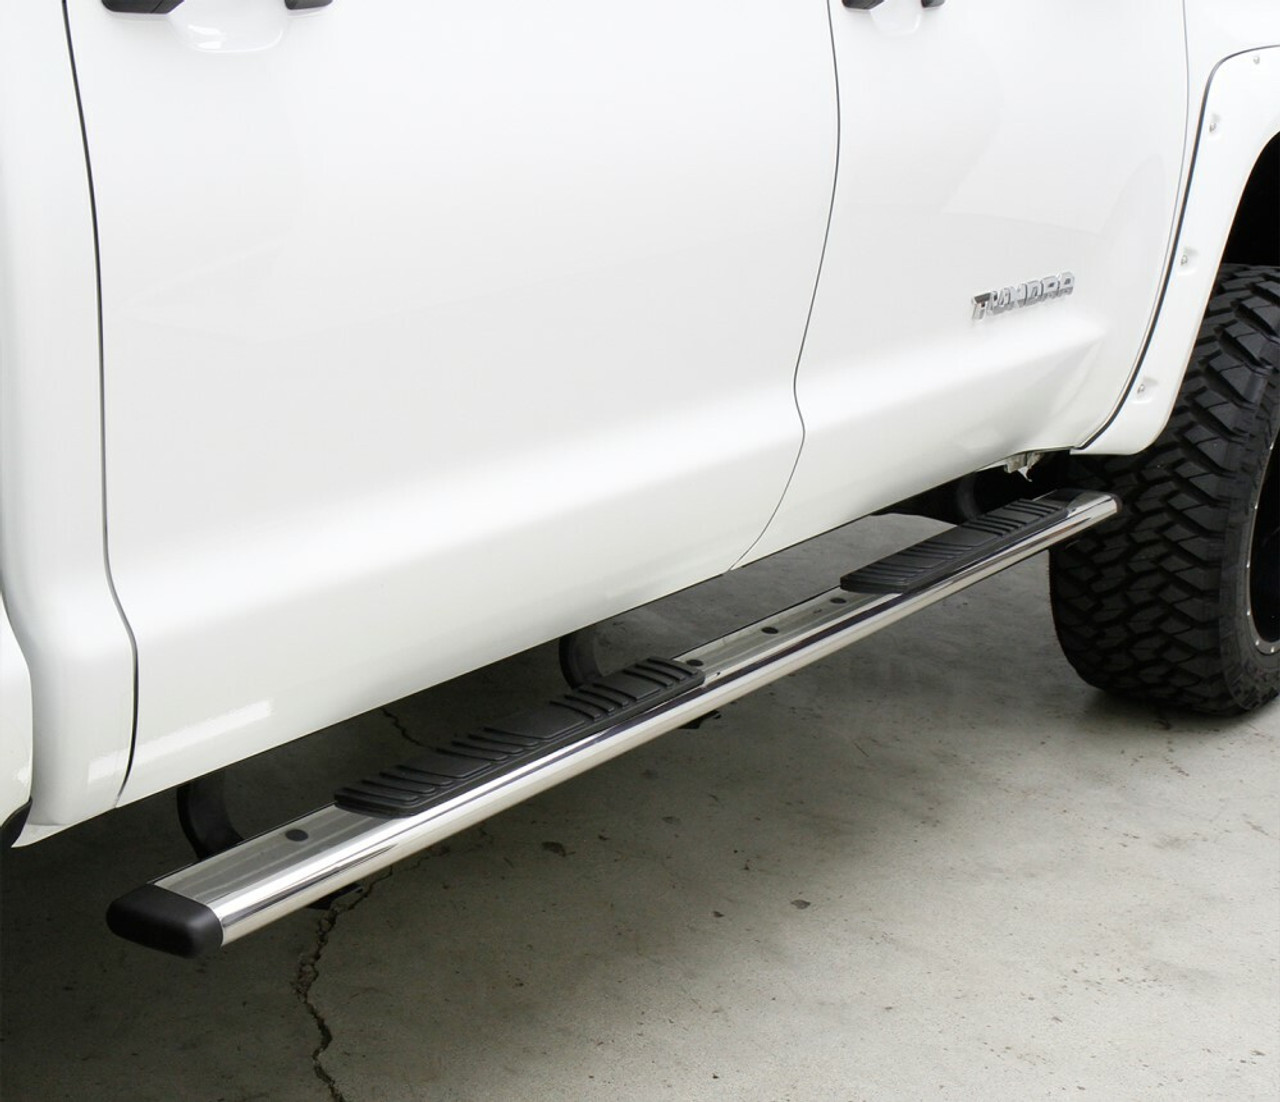 Go Rhino 685411075T Dodge, Journey, 2009 - 2019, 5 inch OE Xtreme Low Profile - Complete Kit: Sidesteps + Brackets, Galvanized Steel, Textured black, 650075T side bars + 6841105 OE Xtreme Brackets. 5 inch wide x 75 inch long side bars